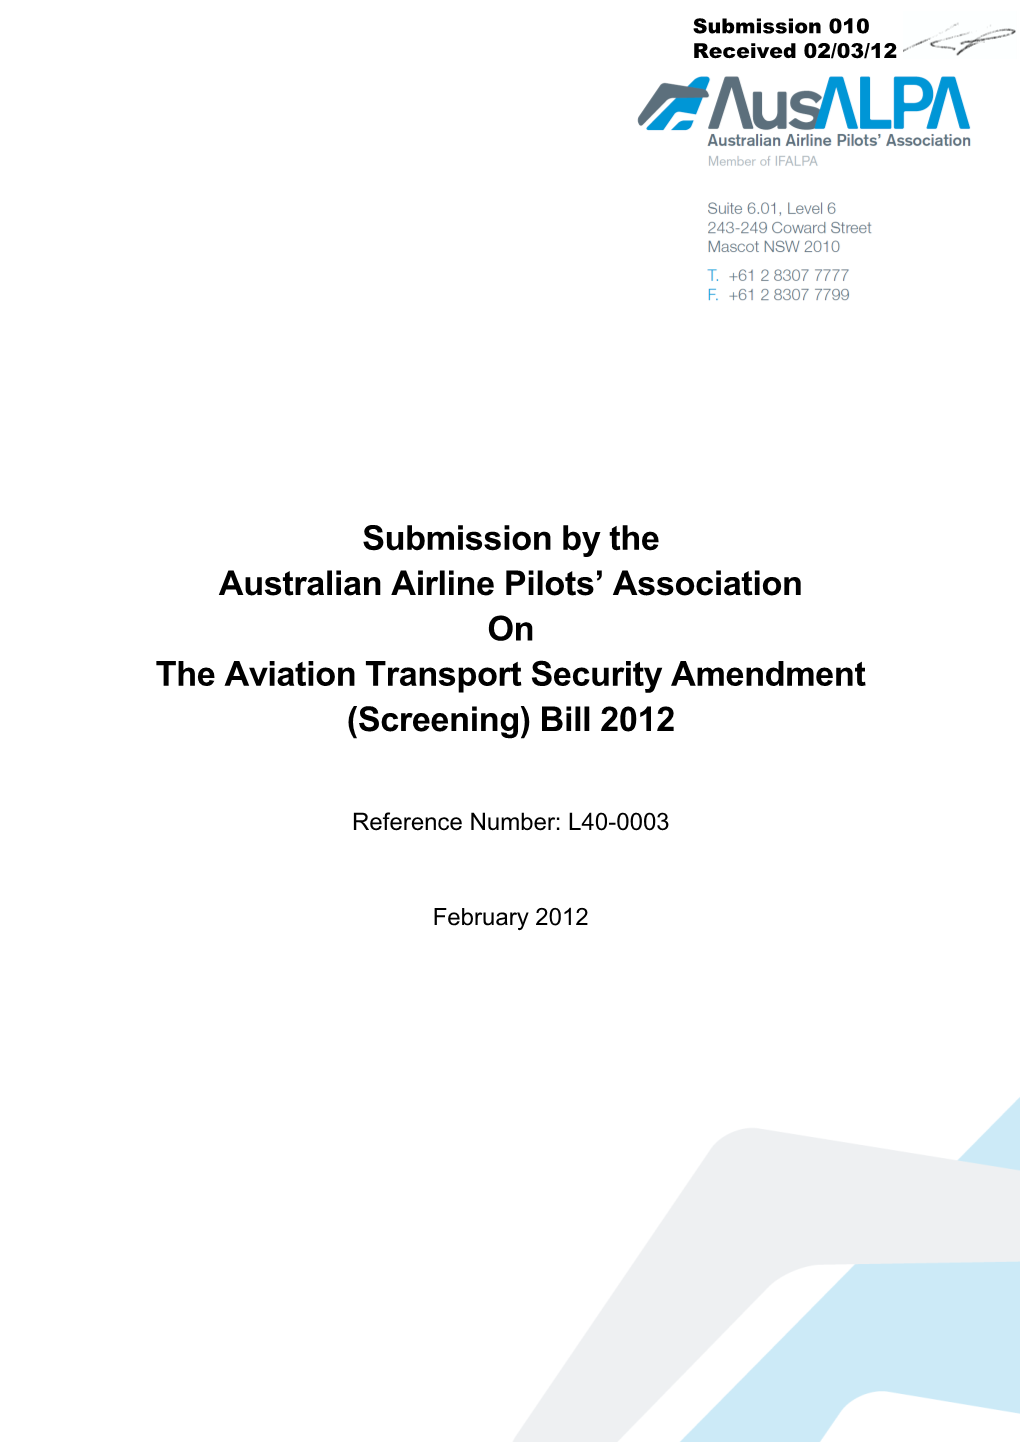 Submission by the Australian Airline Pilots' Association on the Aviation Transport Security Amendment